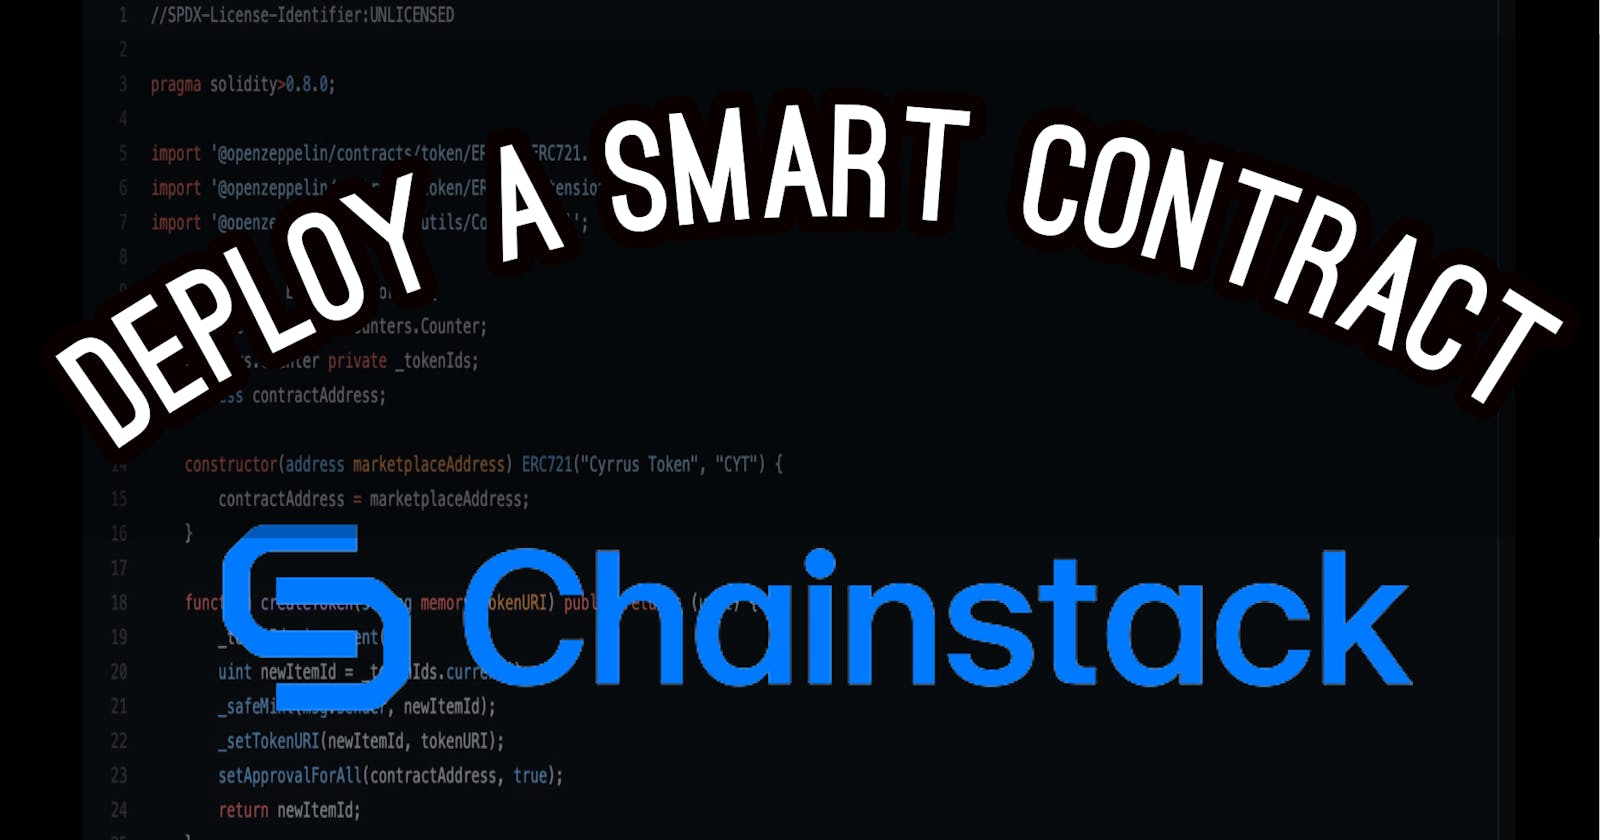 Deploy a smart contract on chainstack